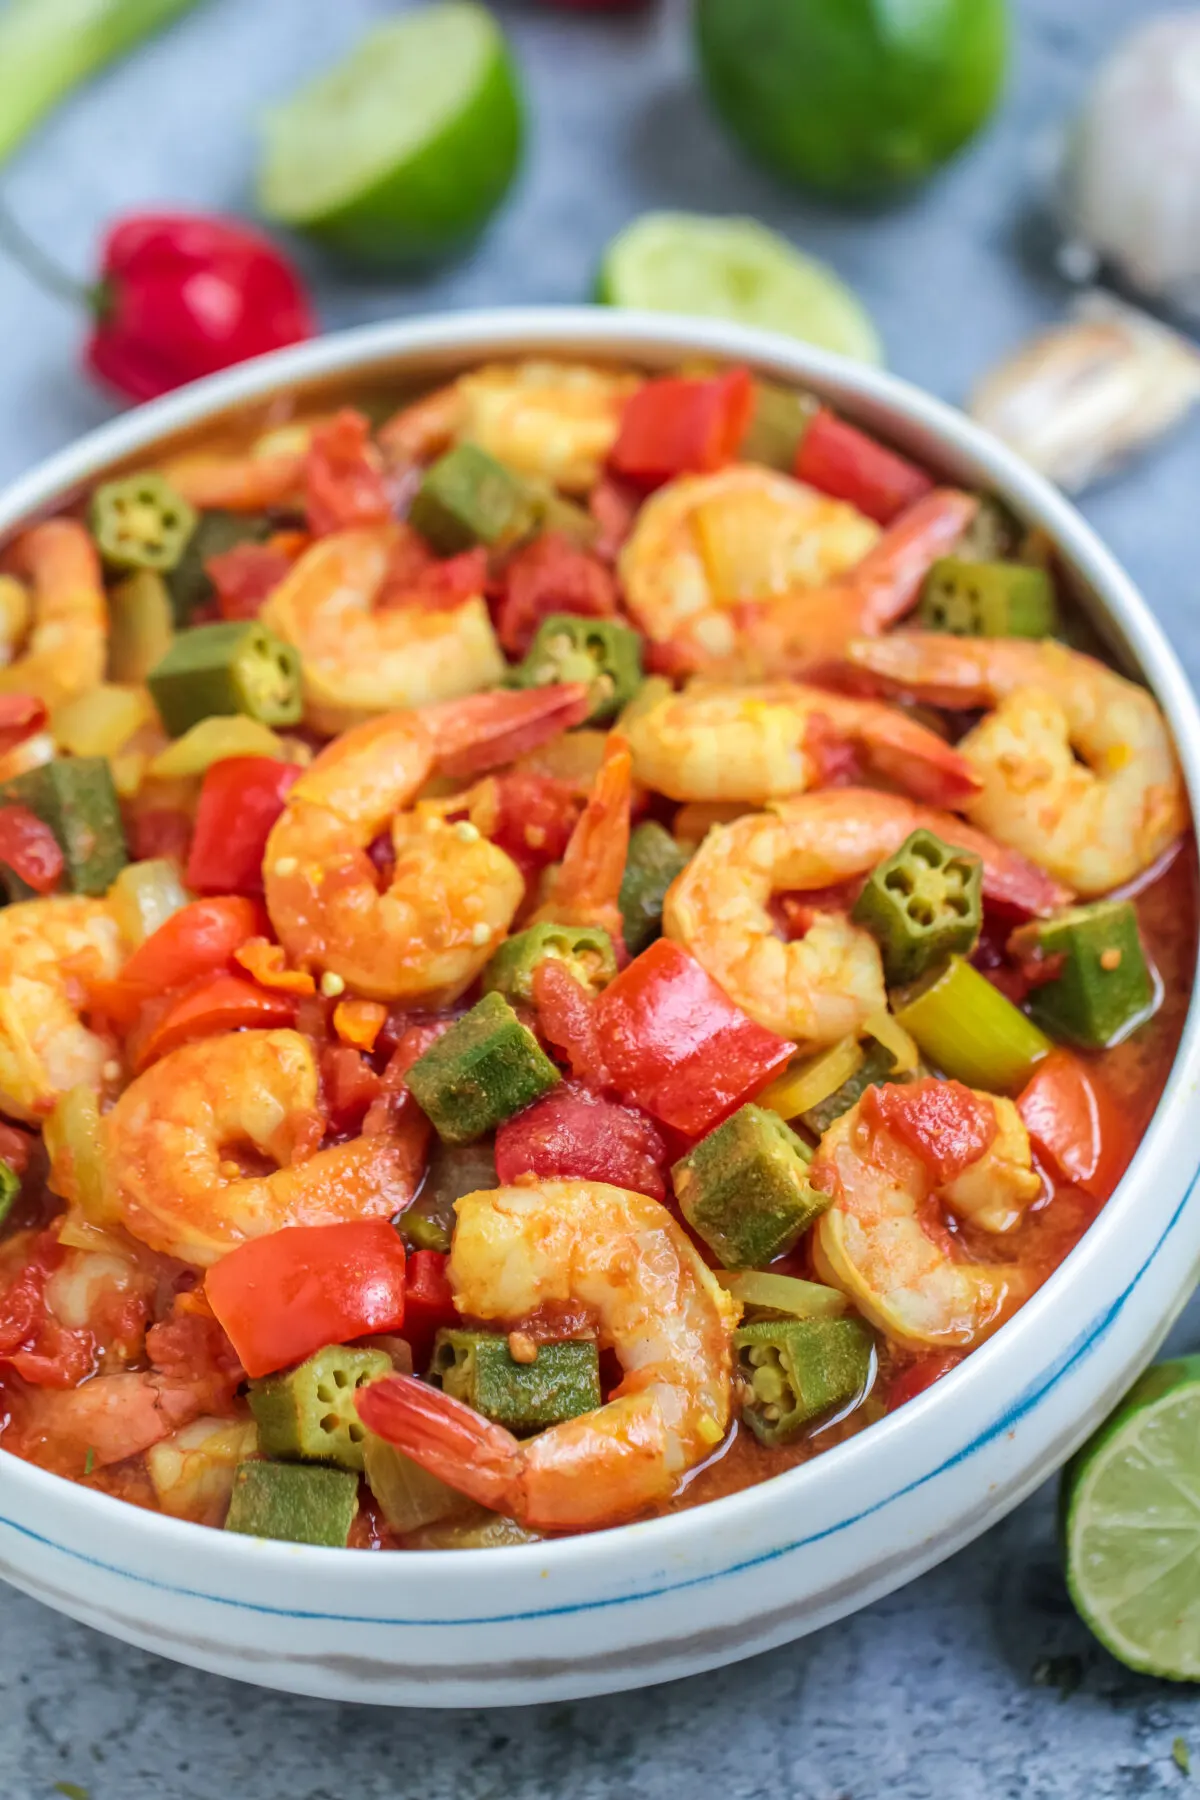 This Caribbean Okra and Shrimp recipe is a simple, spicy, and flavourful stew featuring plump shrimp, crisp okra and scotch bonnet peppers.